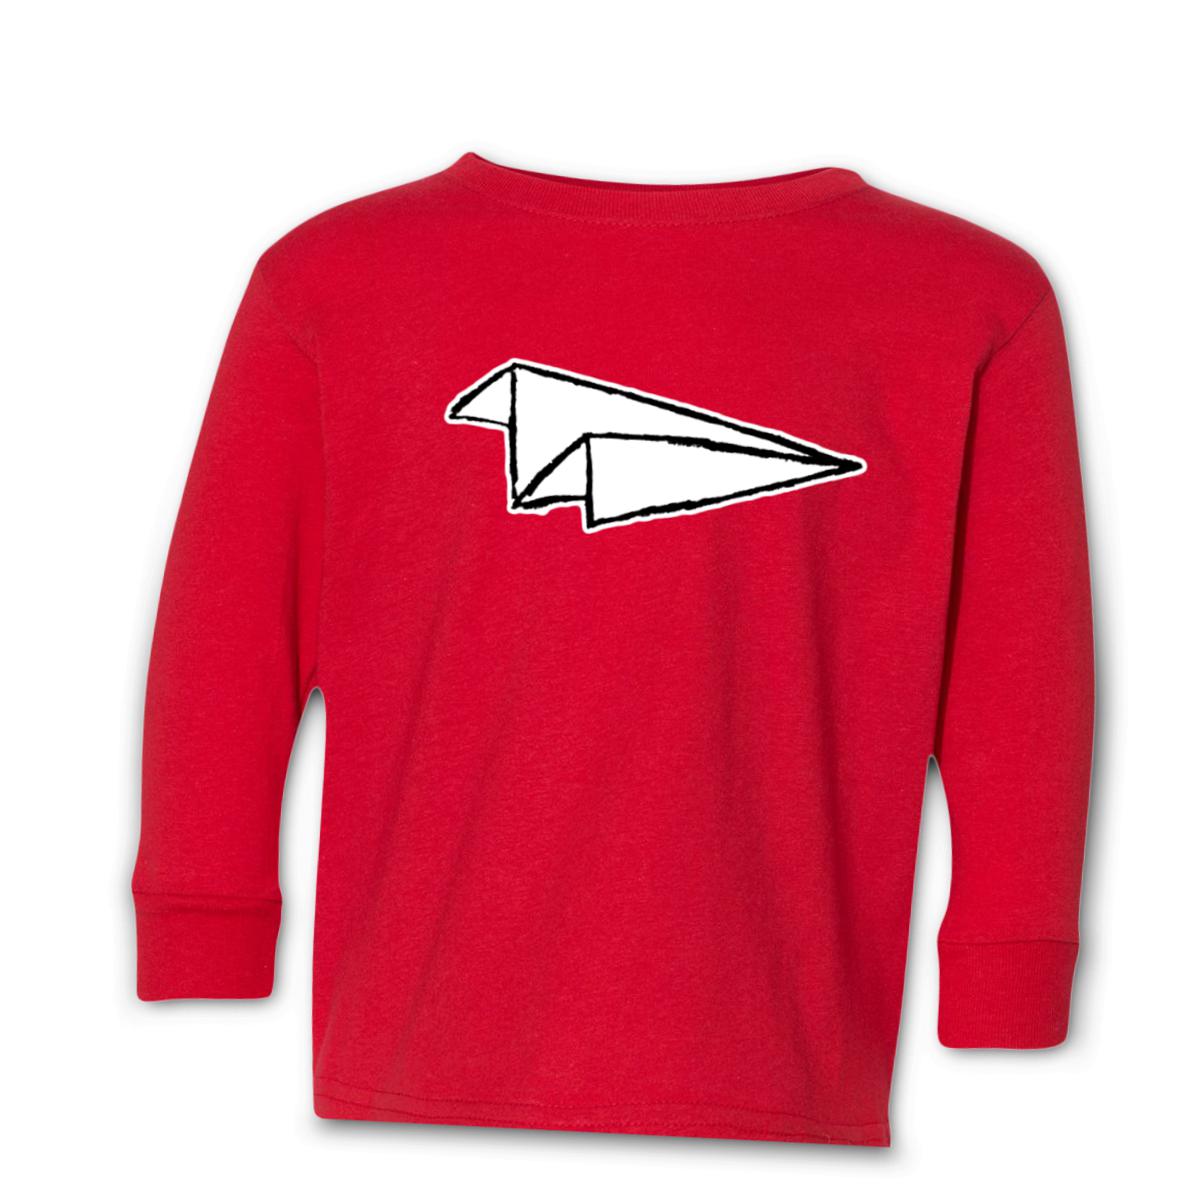 Airplane Sketch Toddler Long Sleeve Tee 2T red